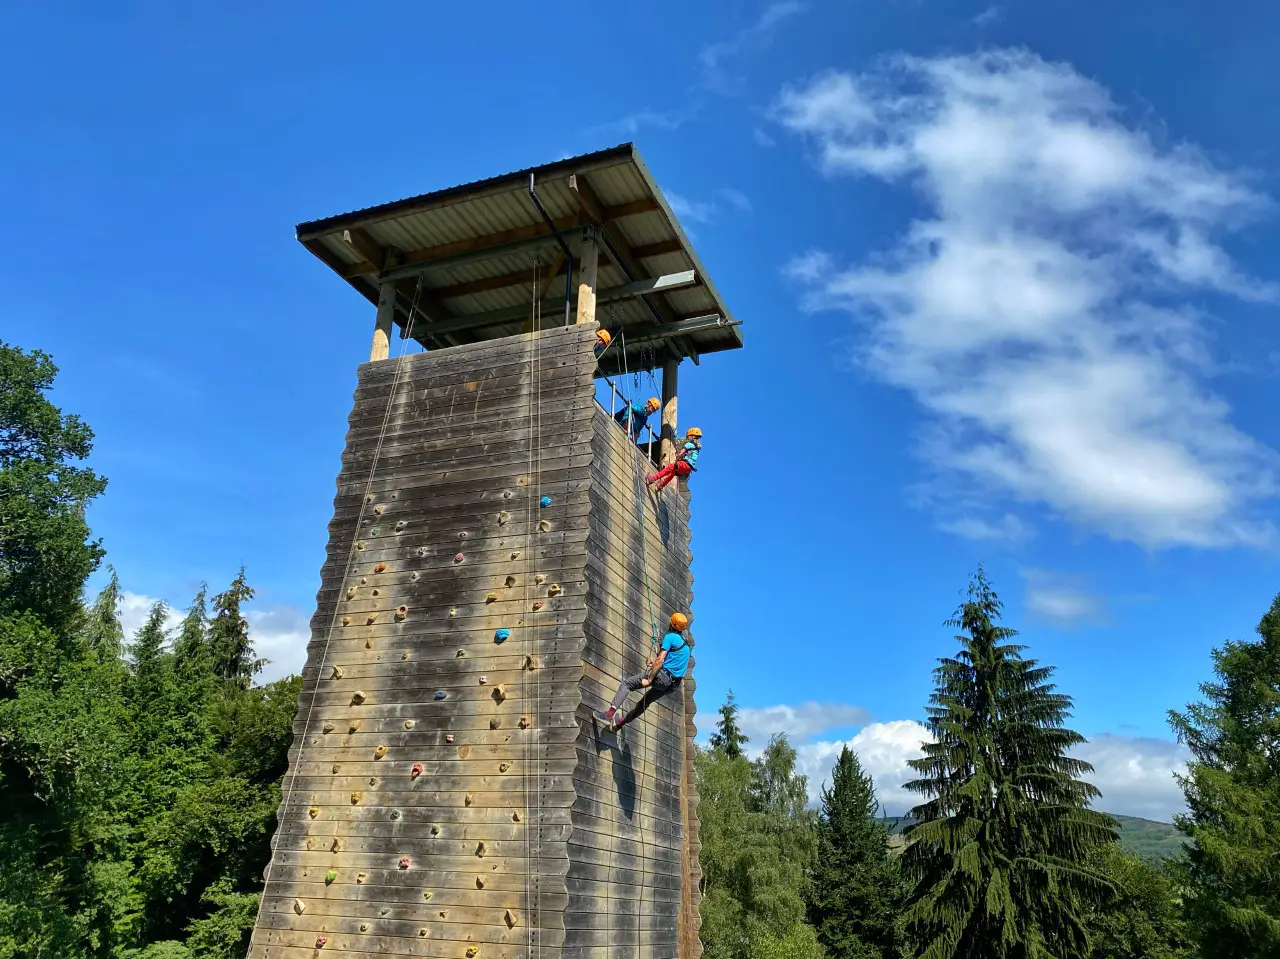 child and adult abseiling down a wooden tower in Perthshire